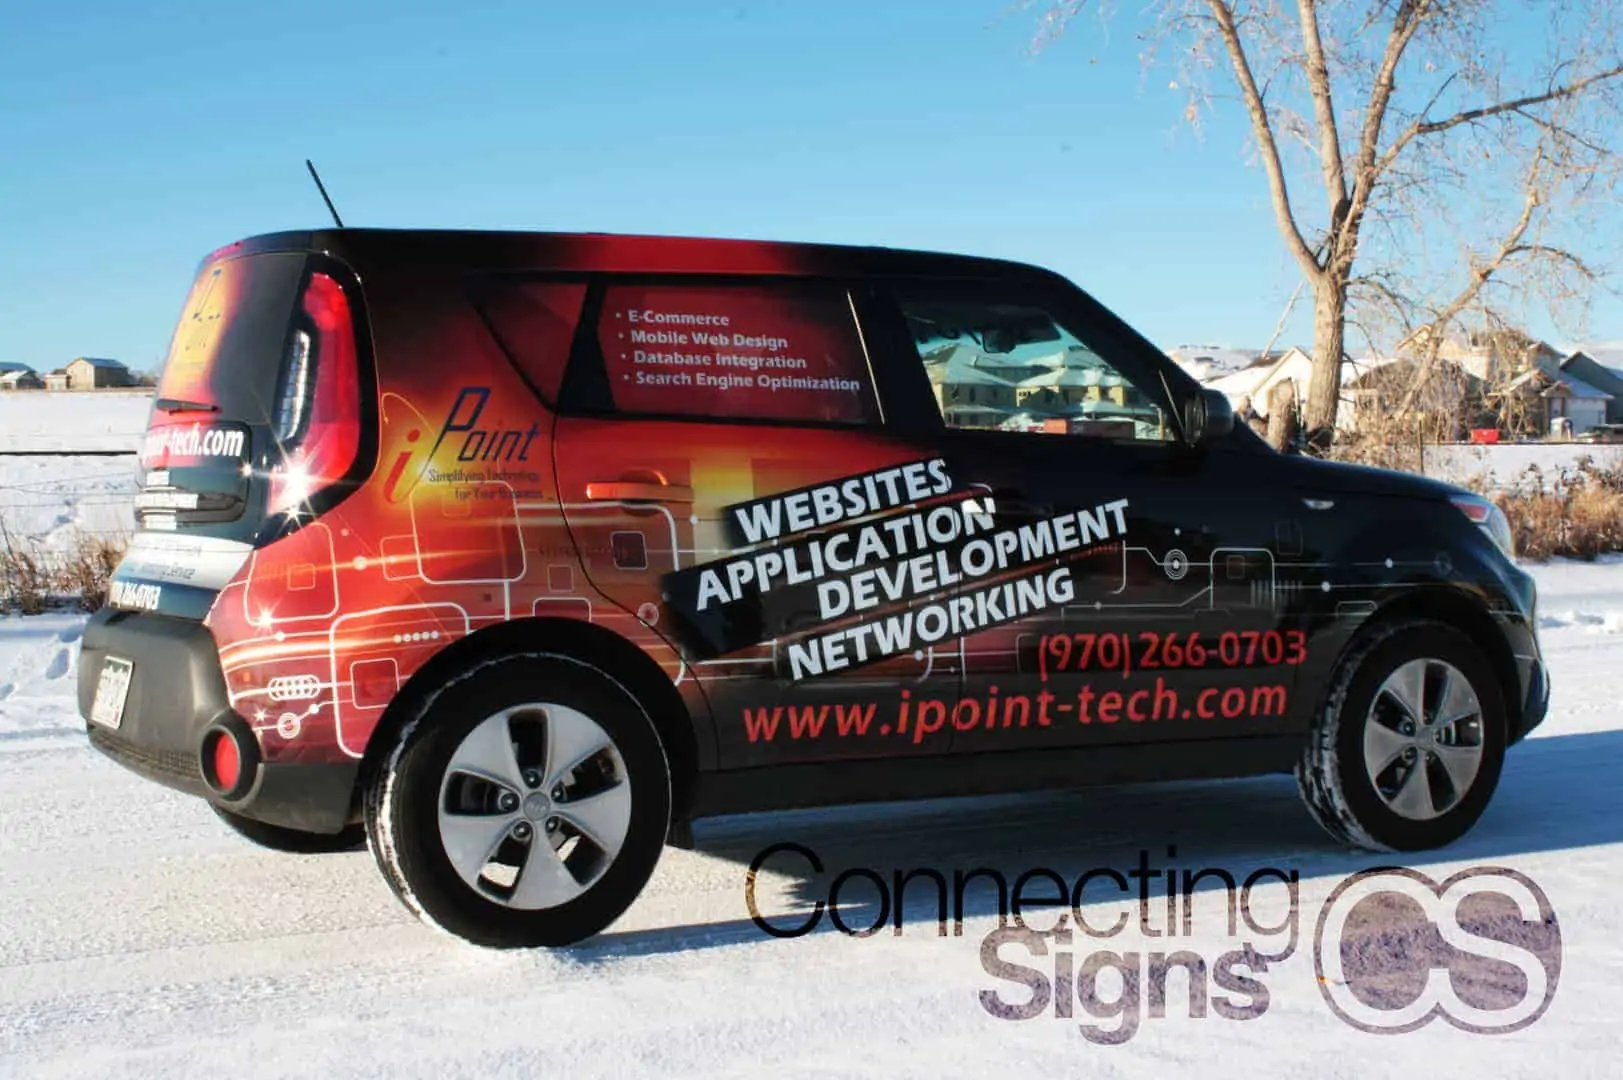 Full Vehicle Wrap - Connecting Signs